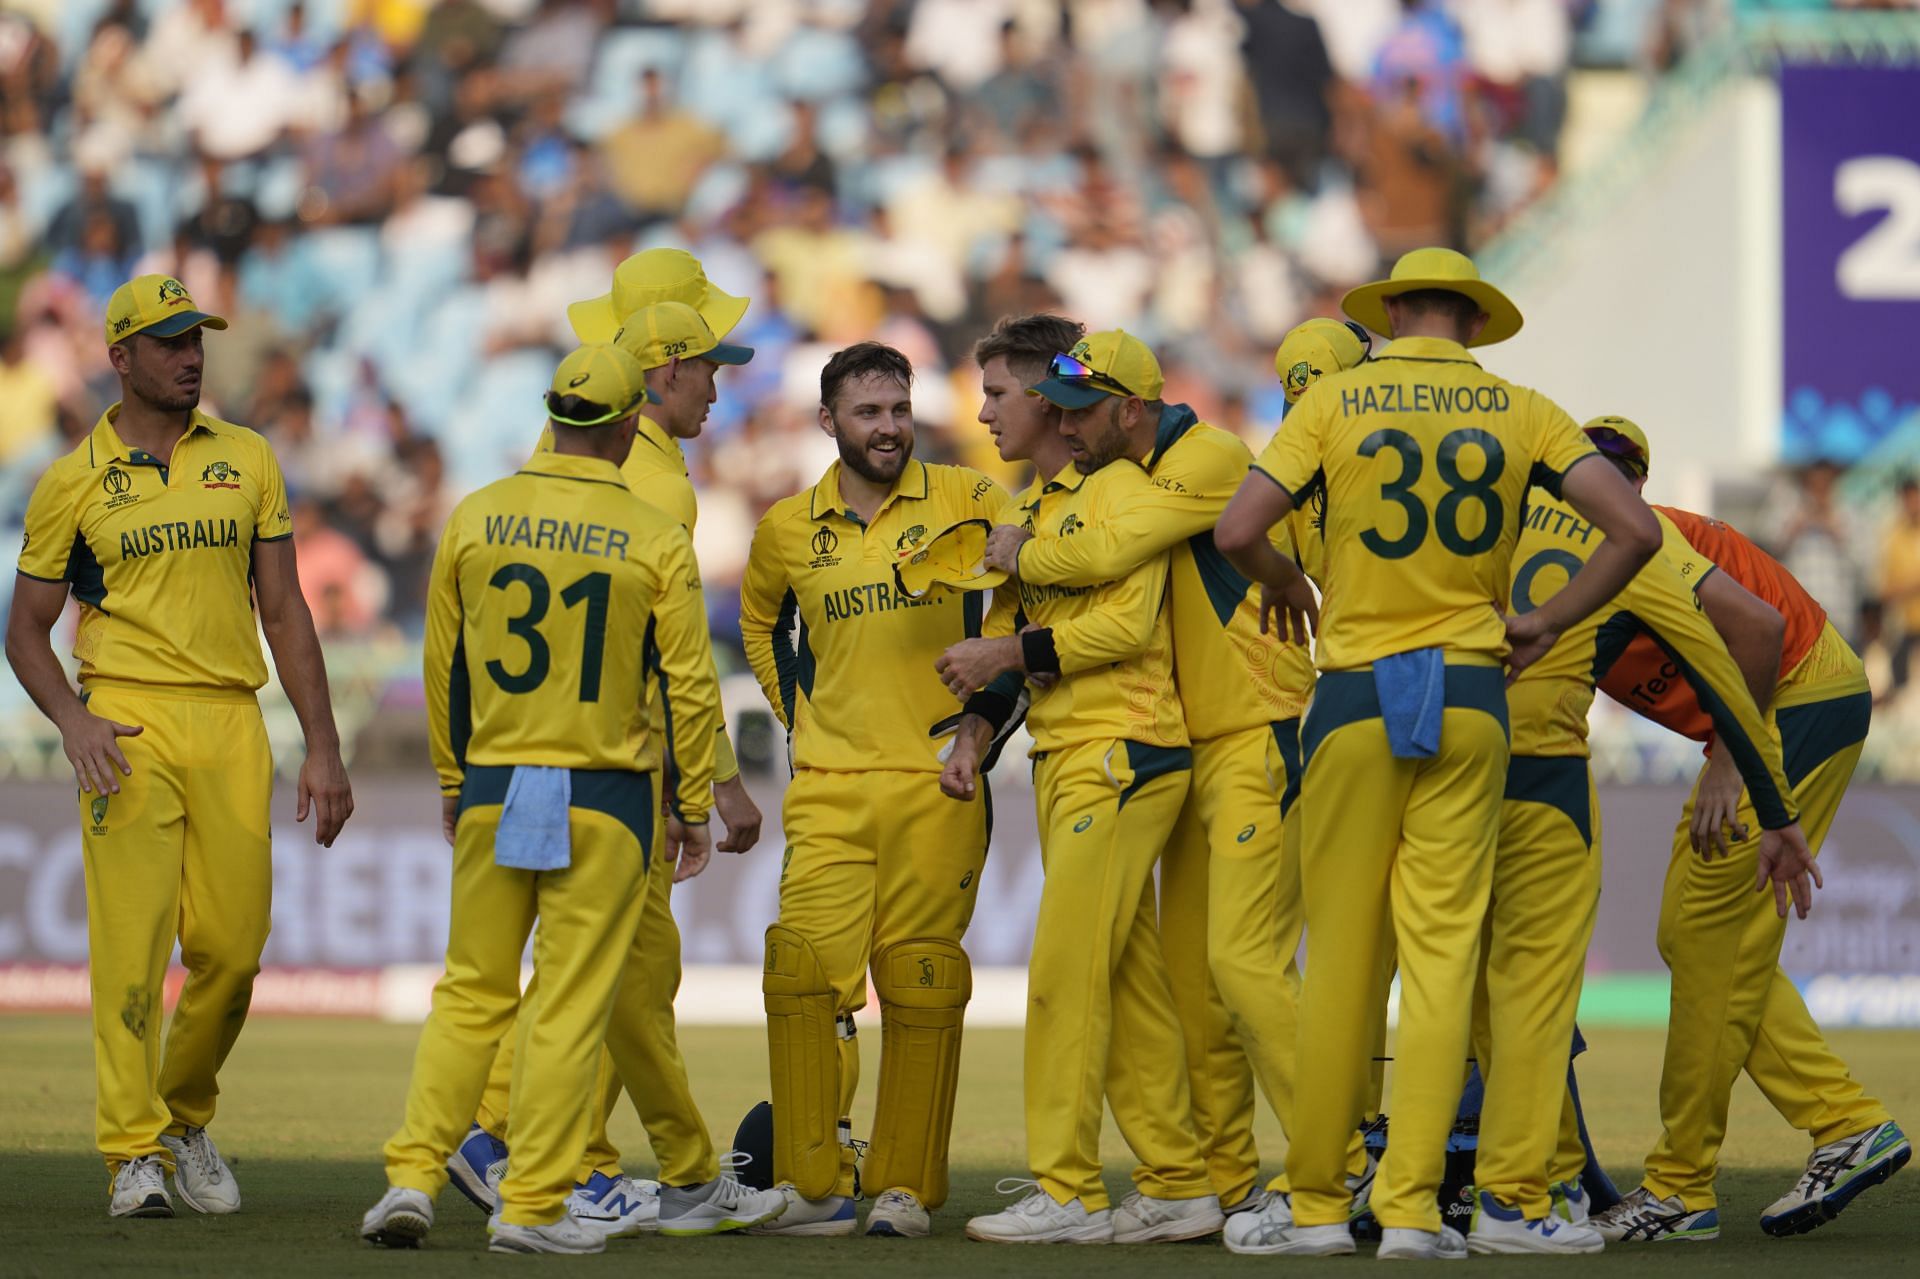 Australia are currently placed last in the points table. [P/C: AP]